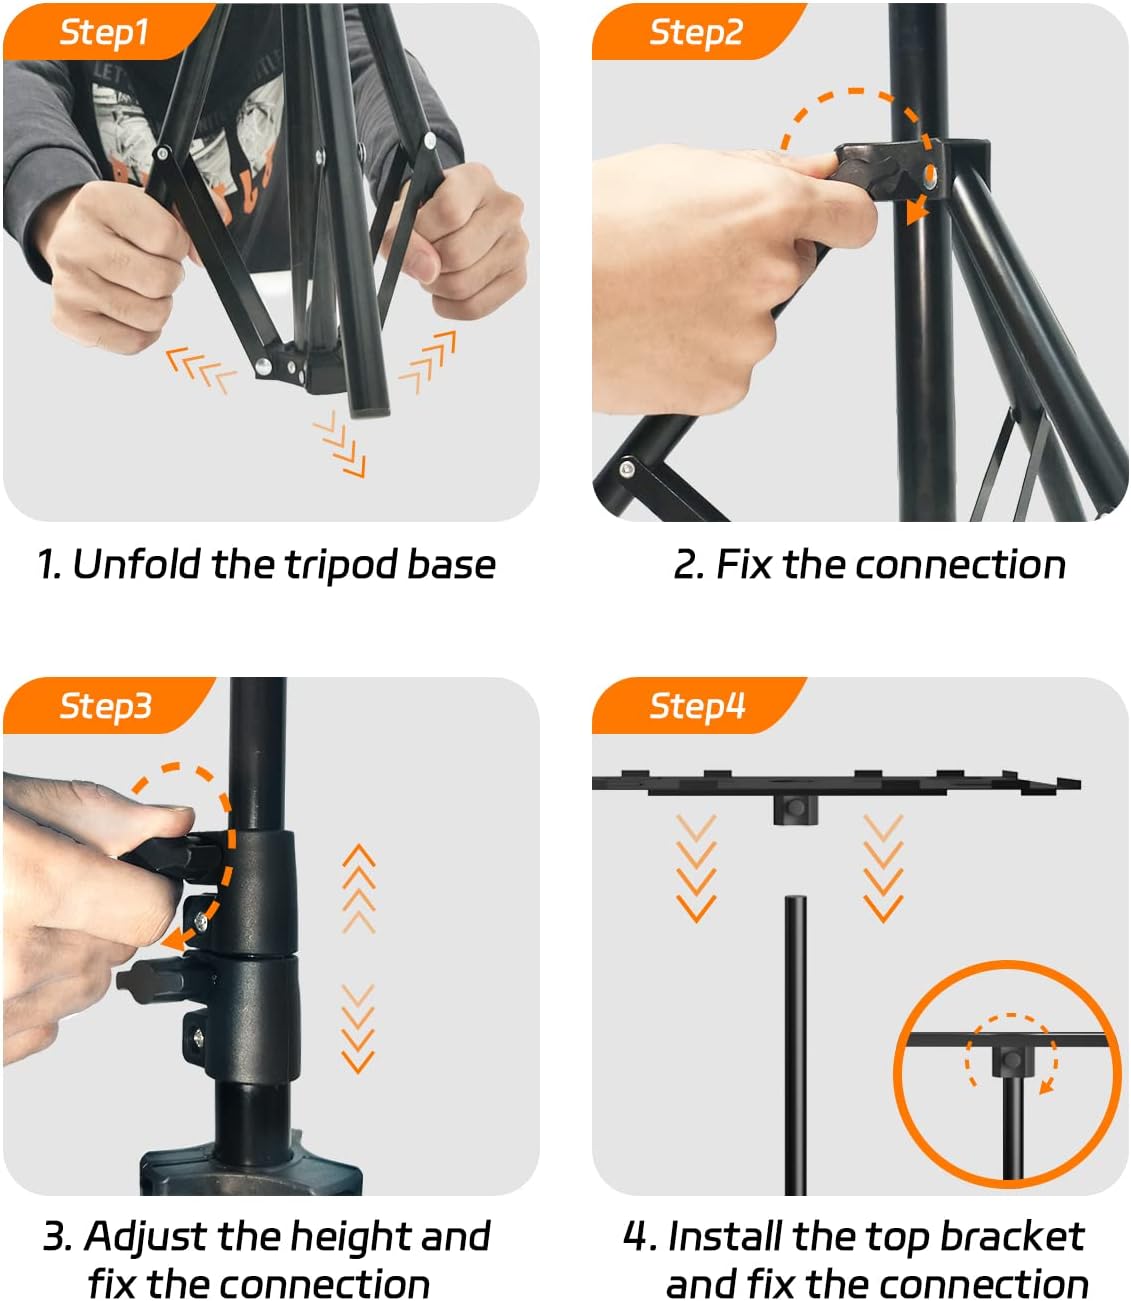 FUDONI Projector Stand Tripod from 14.5'' to 39.4'', Laptop Tripod Stand Height Adjustable for Home Cinema, Office FUDONI